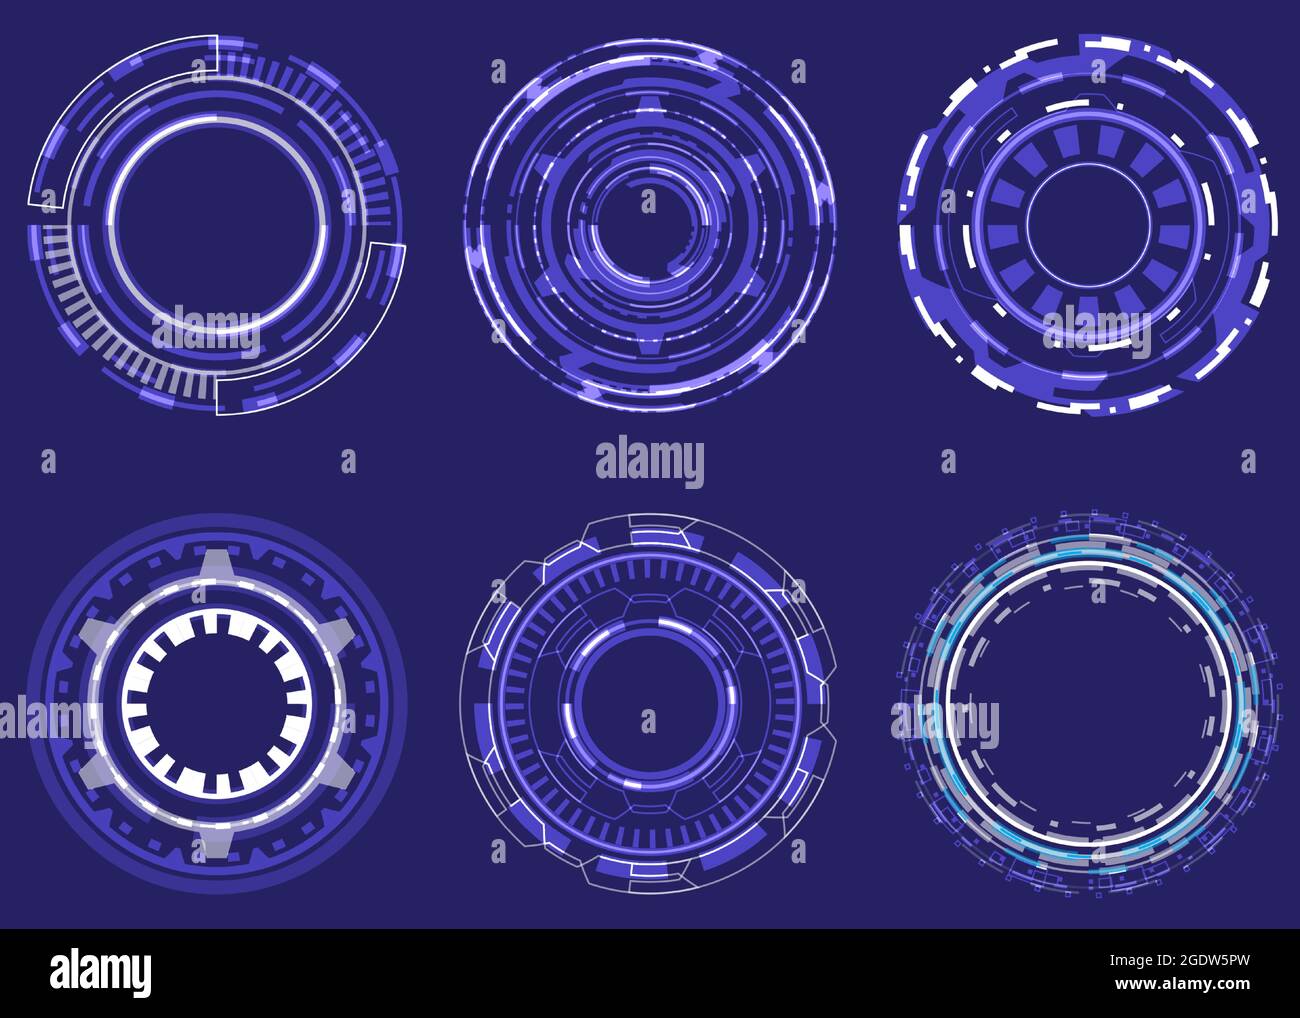 Futuristic Holographic circle of focus elements. Sci-fi round design. Military Collimator Sight. Collection of engineering HUD. Camera Viewfinder set Stock Vector